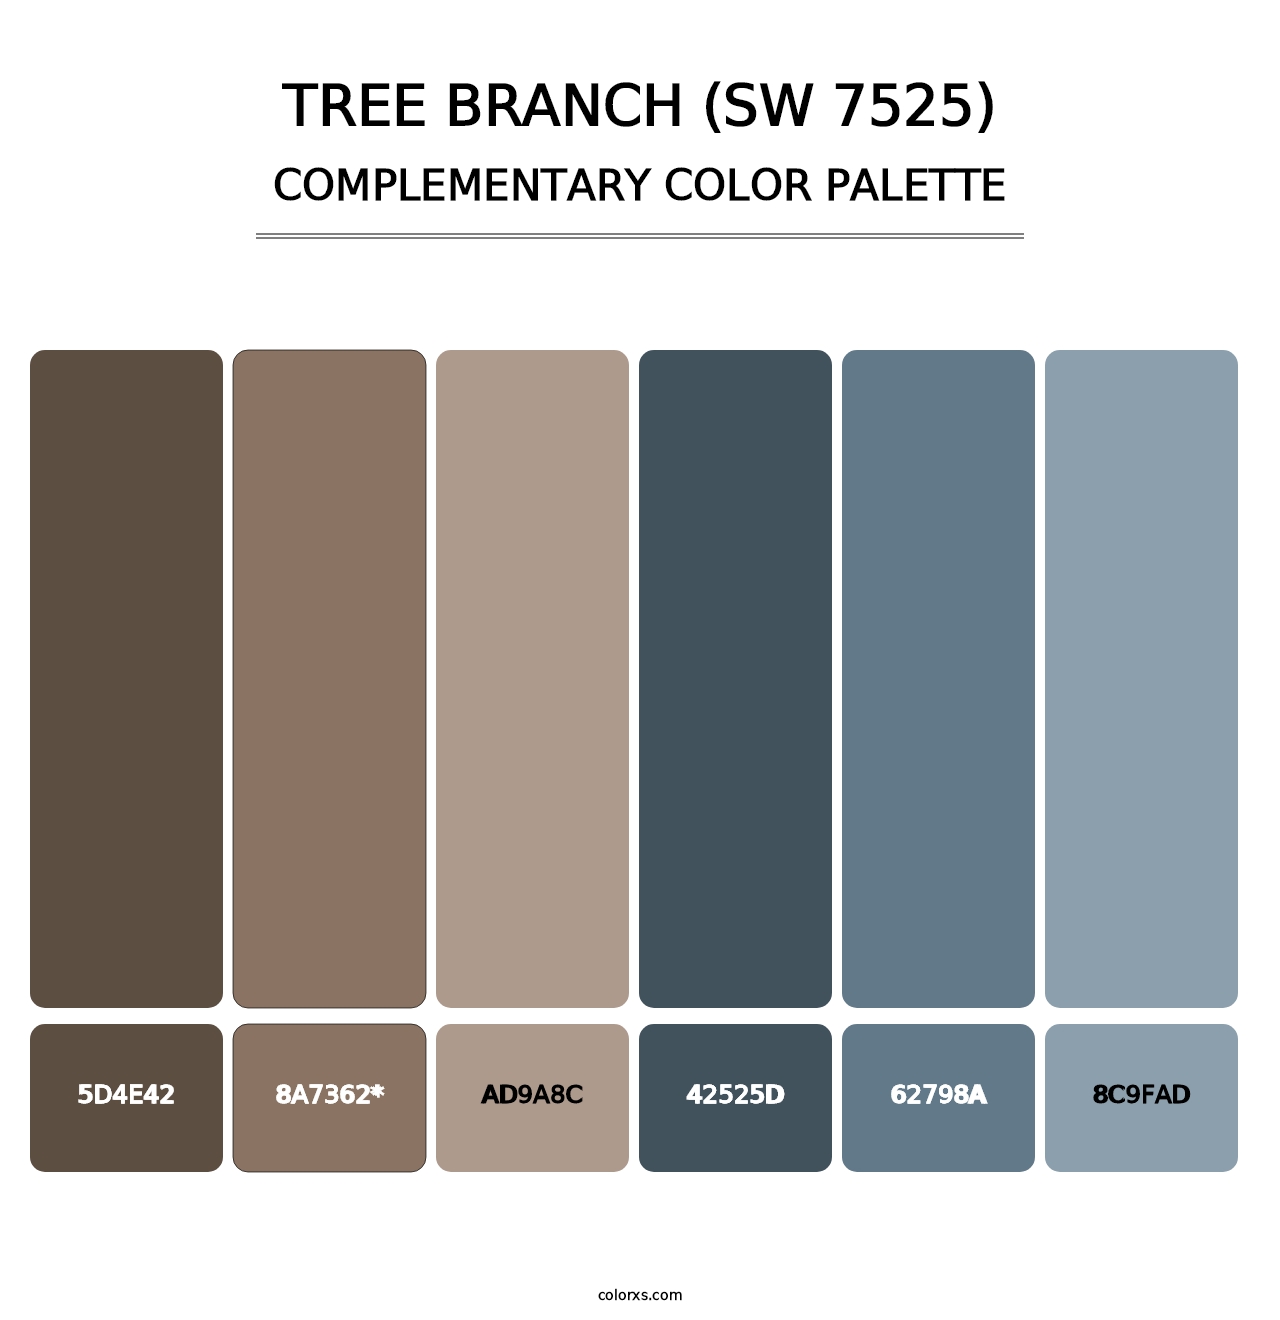 Tree Branch (SW 7525) - Complementary Color Palette